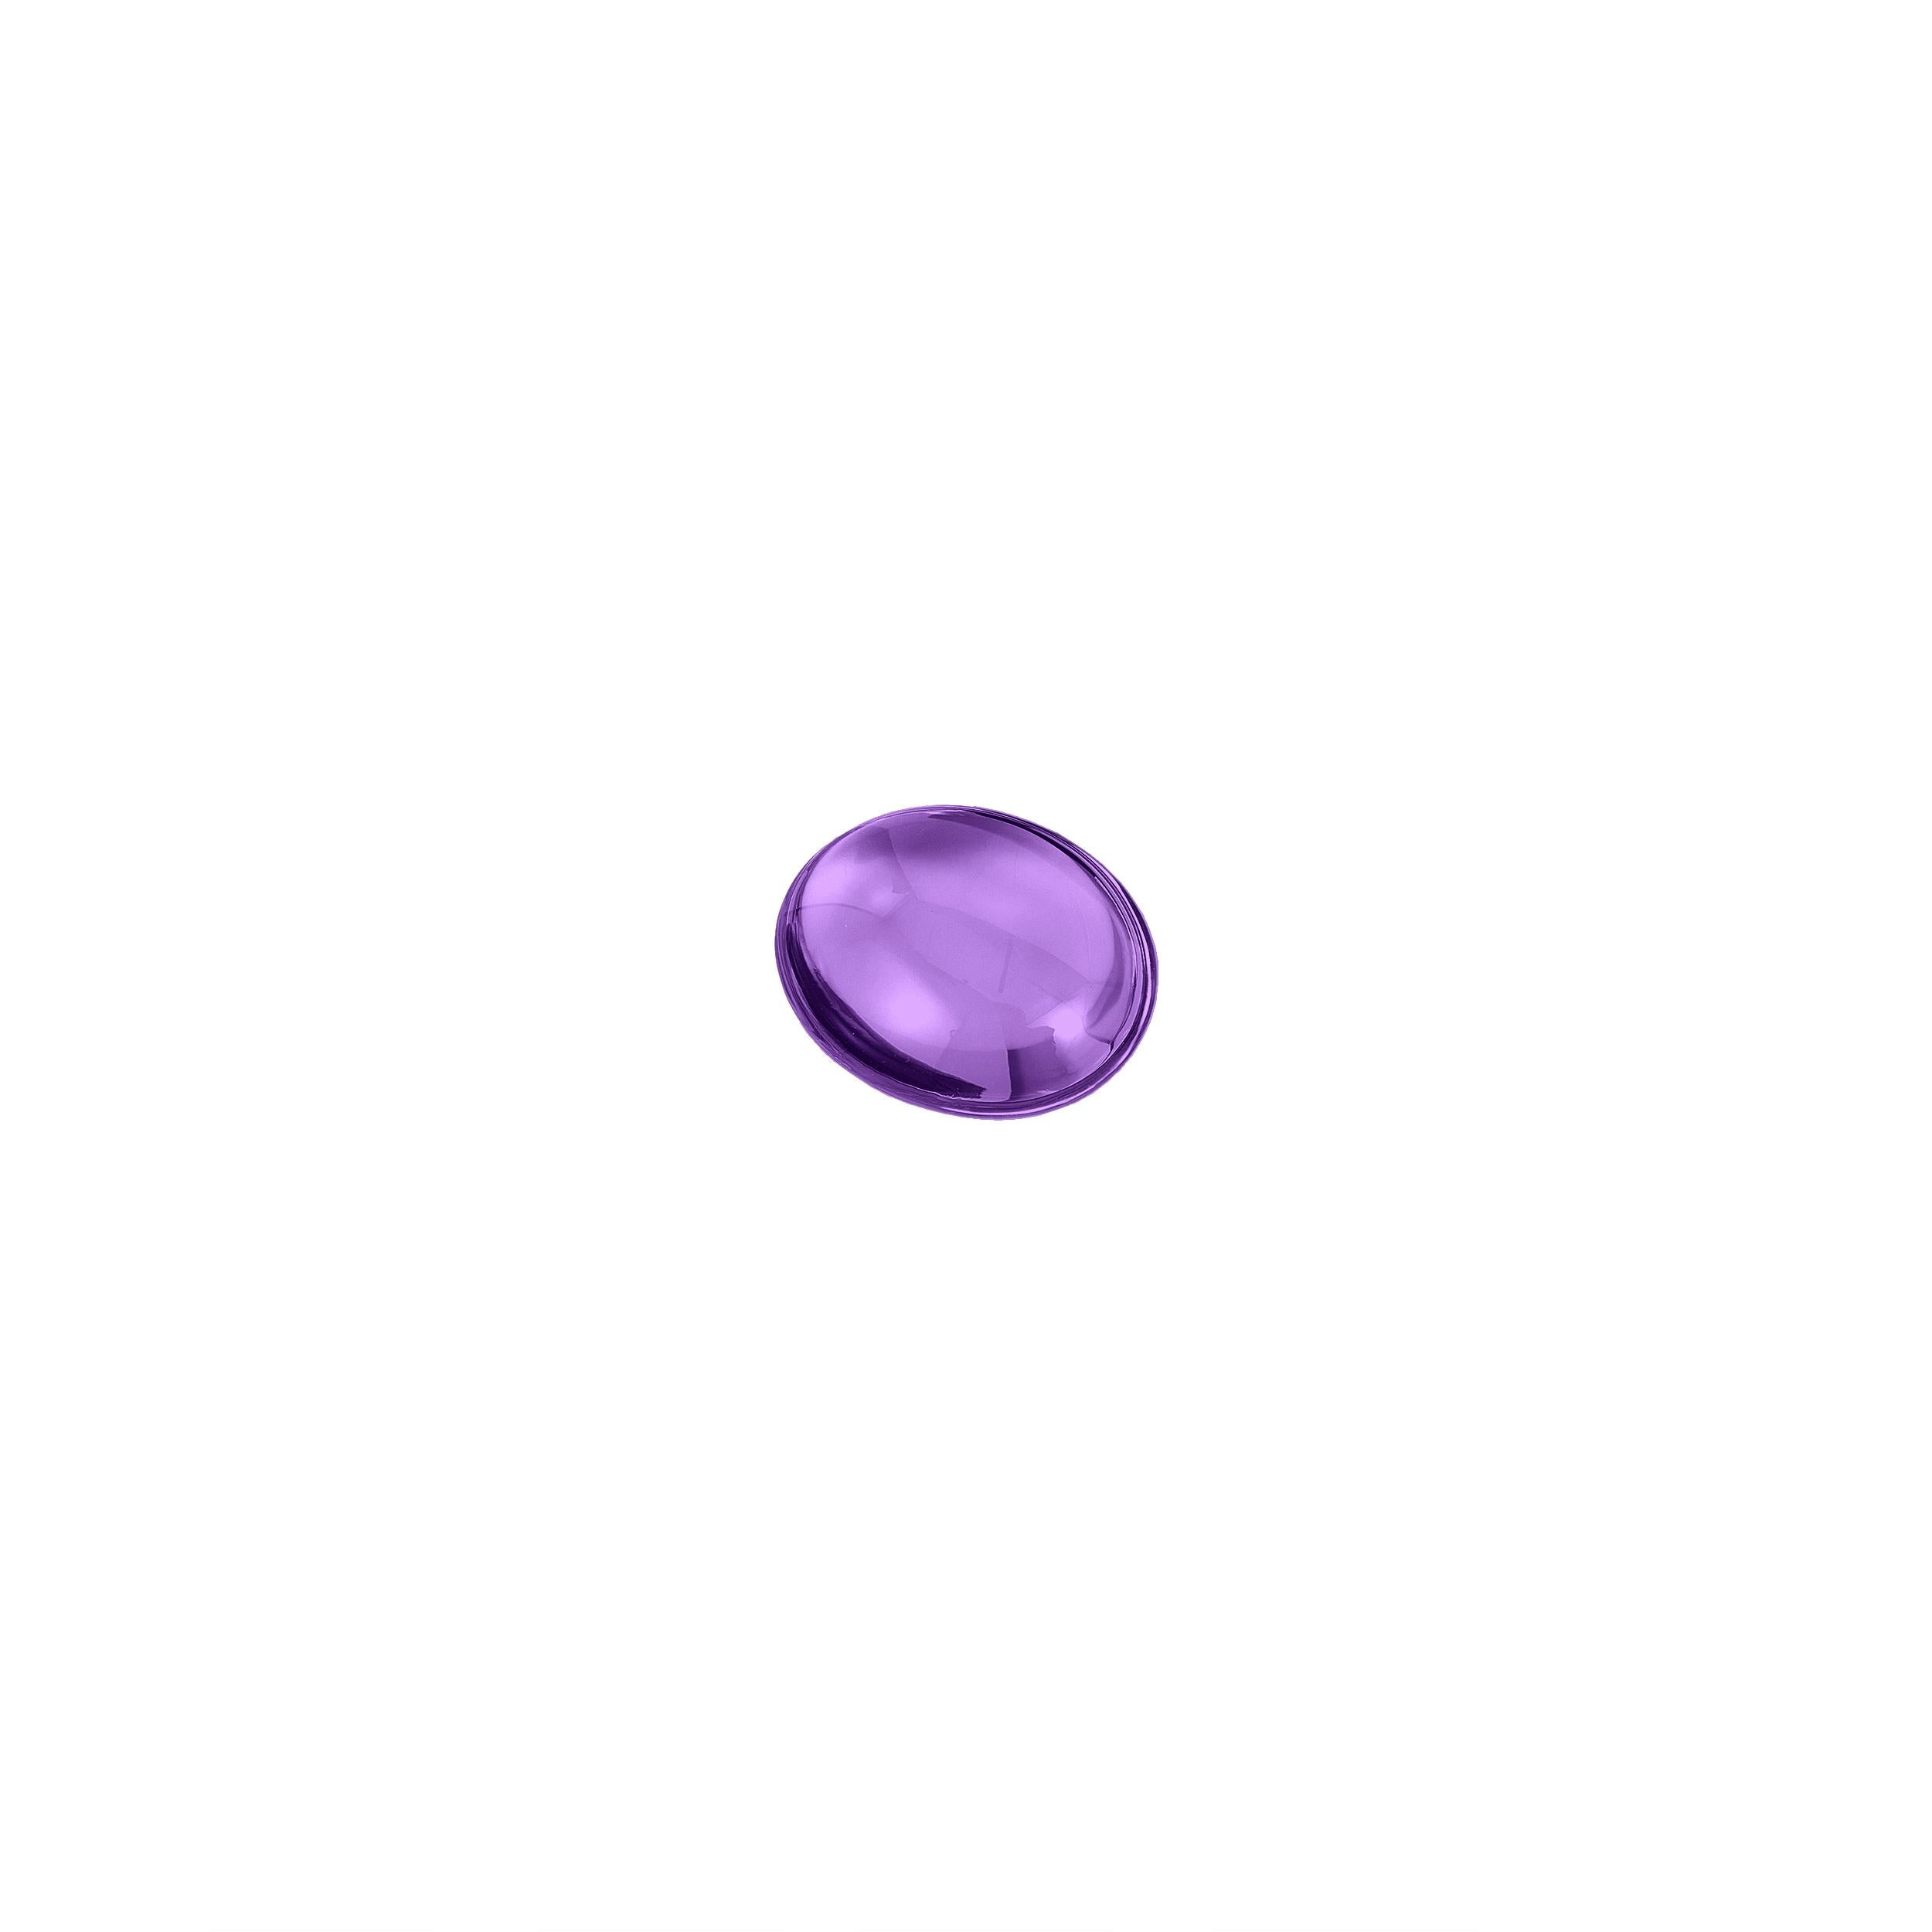 This Amethyst Oval Disc Stone from the 